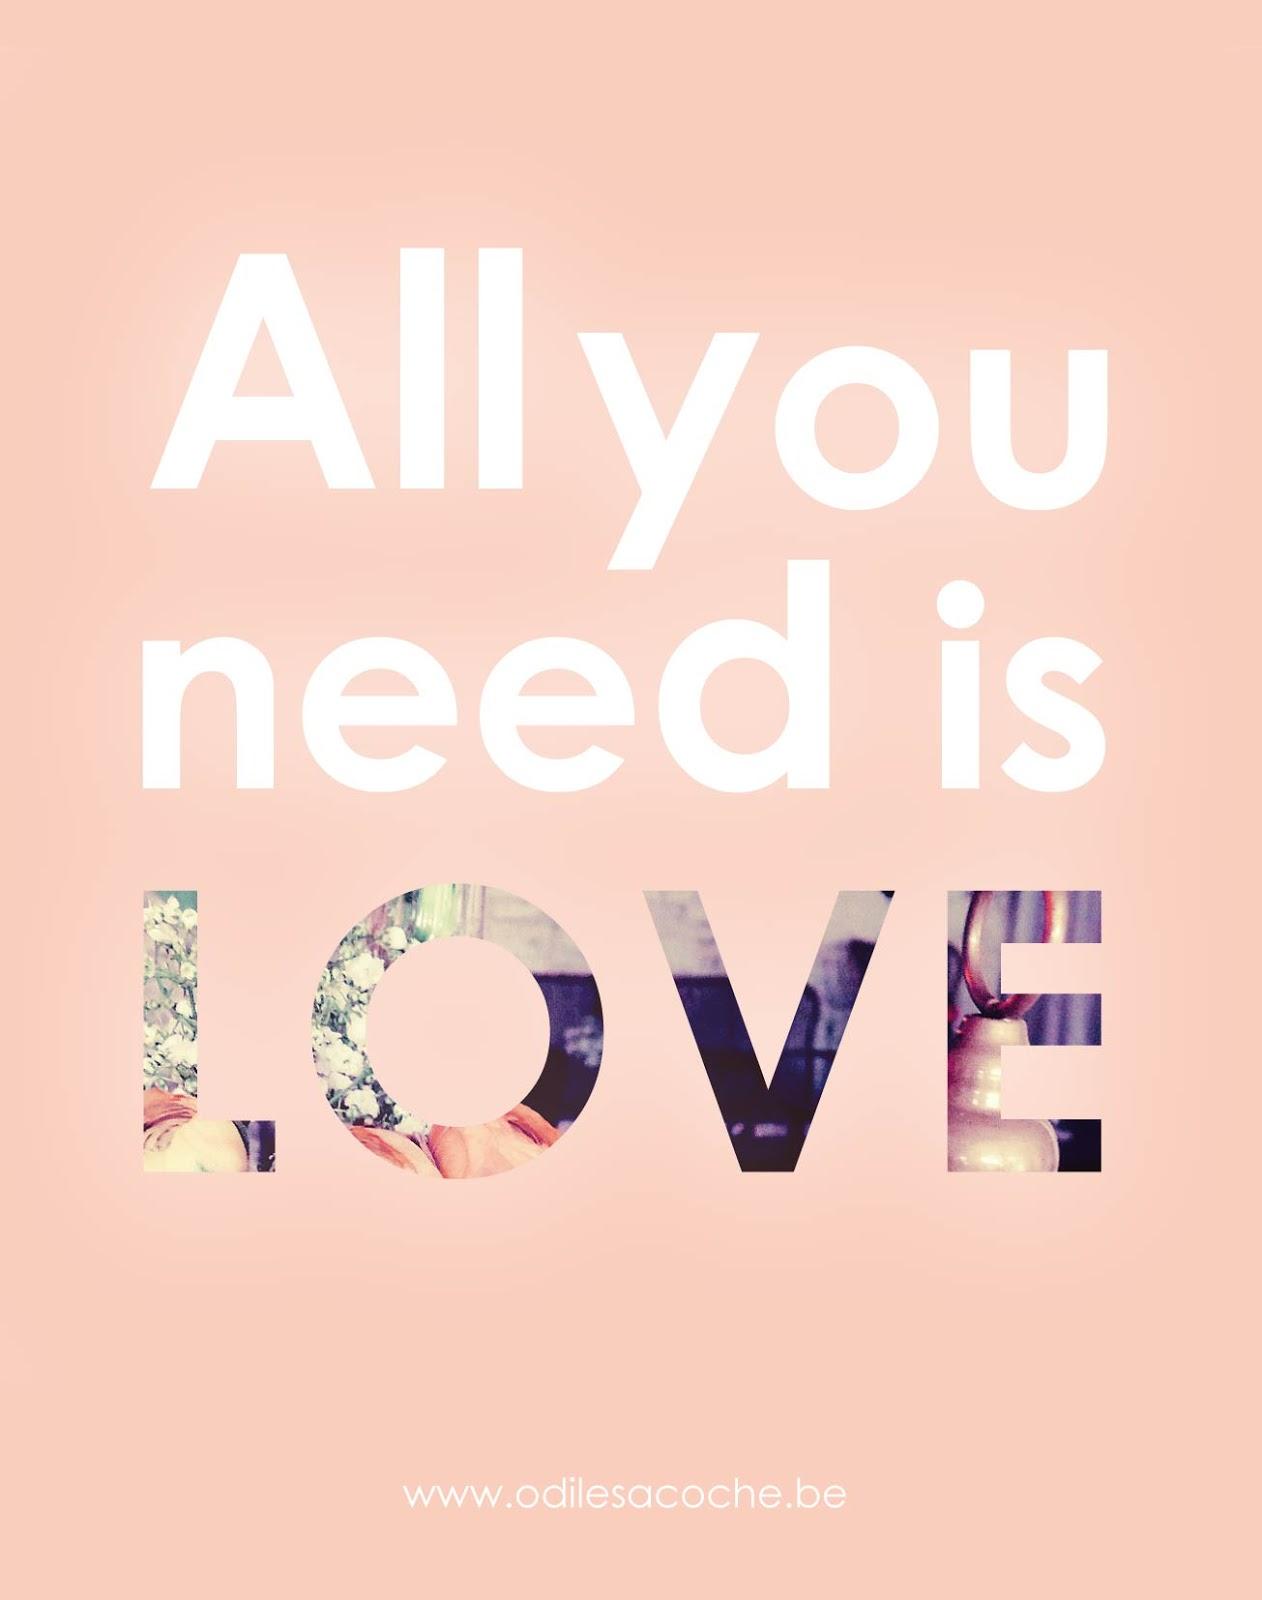 All you need is Love !